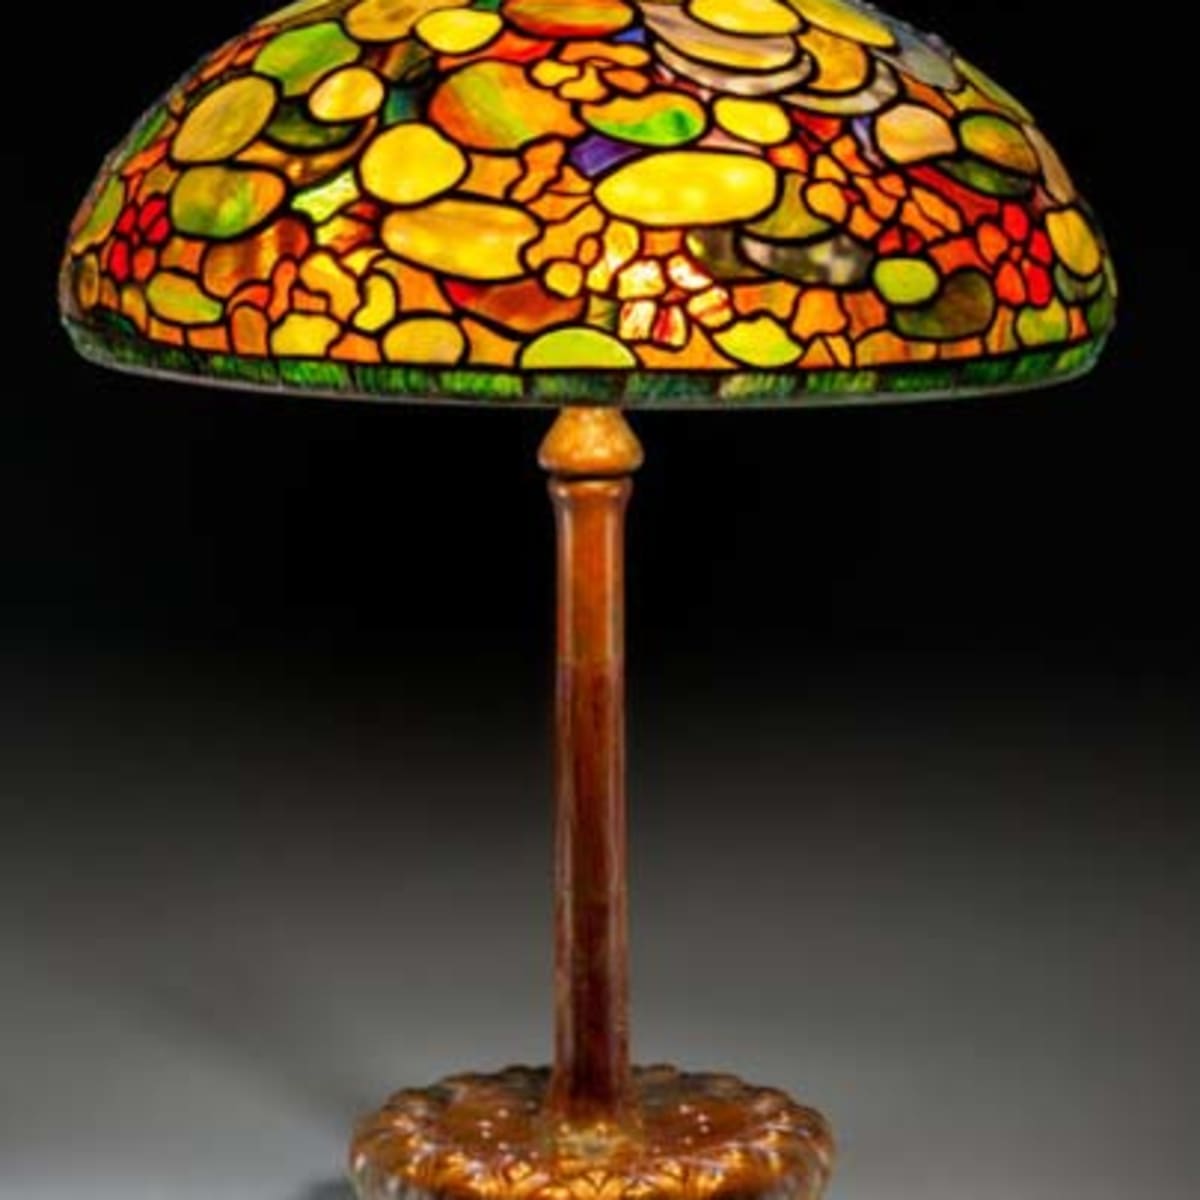 Why we love Tiffany Lamps, stained glass lamps and tiffany style lighting